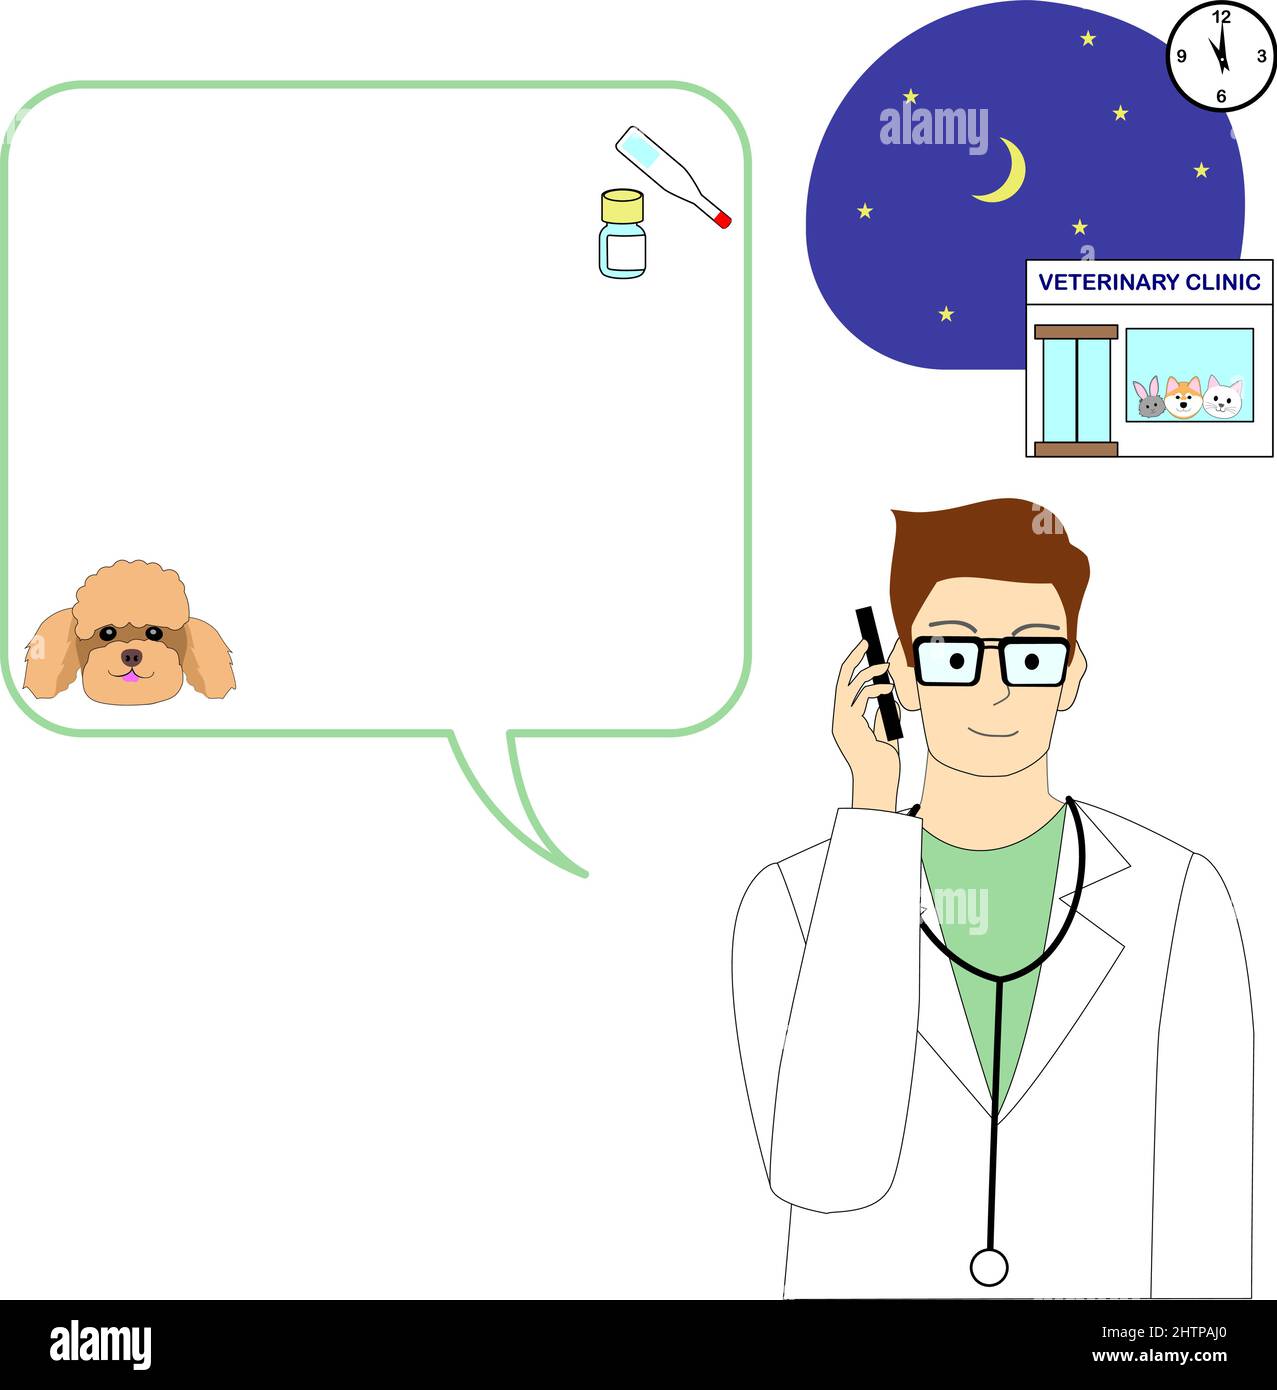 Night scene of the veterinary clinic with a speech balloon and veterinarian man on a cellphone Stock Vector